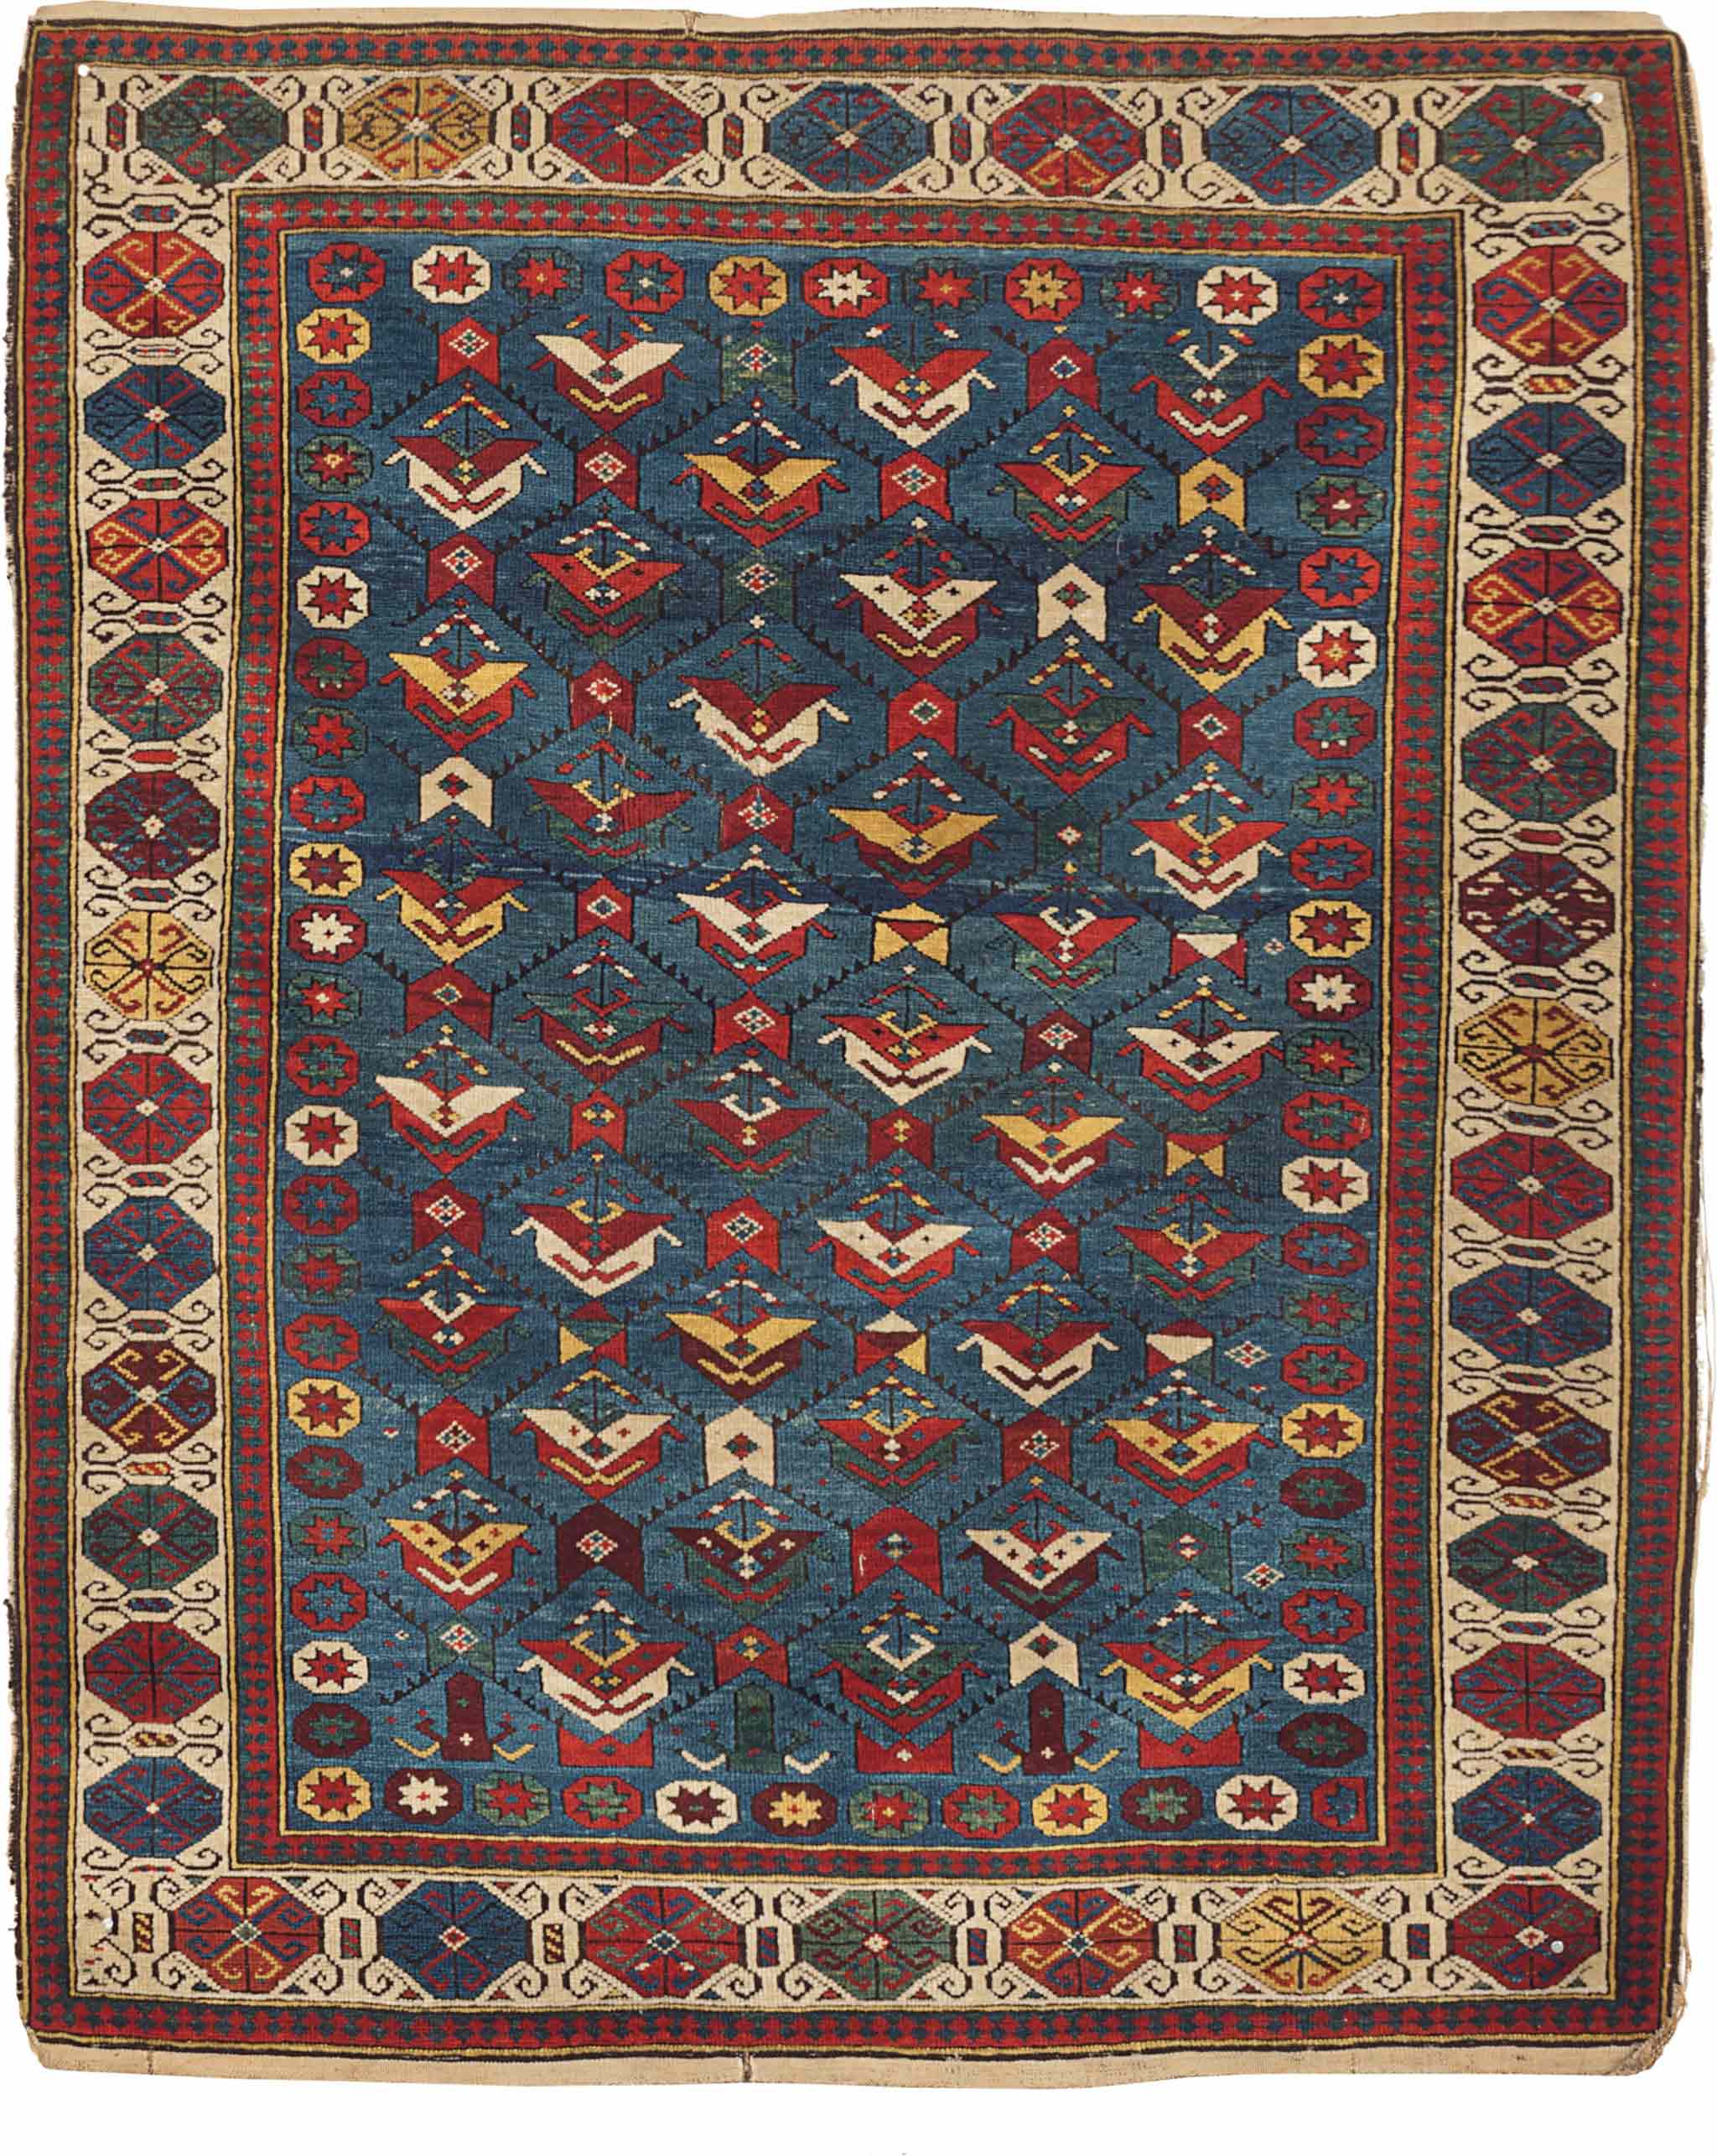 An East Caucasian Kuba Rug, circa 1880, approximately 4 ft. 4 in. x 3 ft. 5 in. Property from the Birmingham Museum of Art. Estimate: $8,000-12,000 (USD), Sold 31 March 2016, for $8,125 (USD).